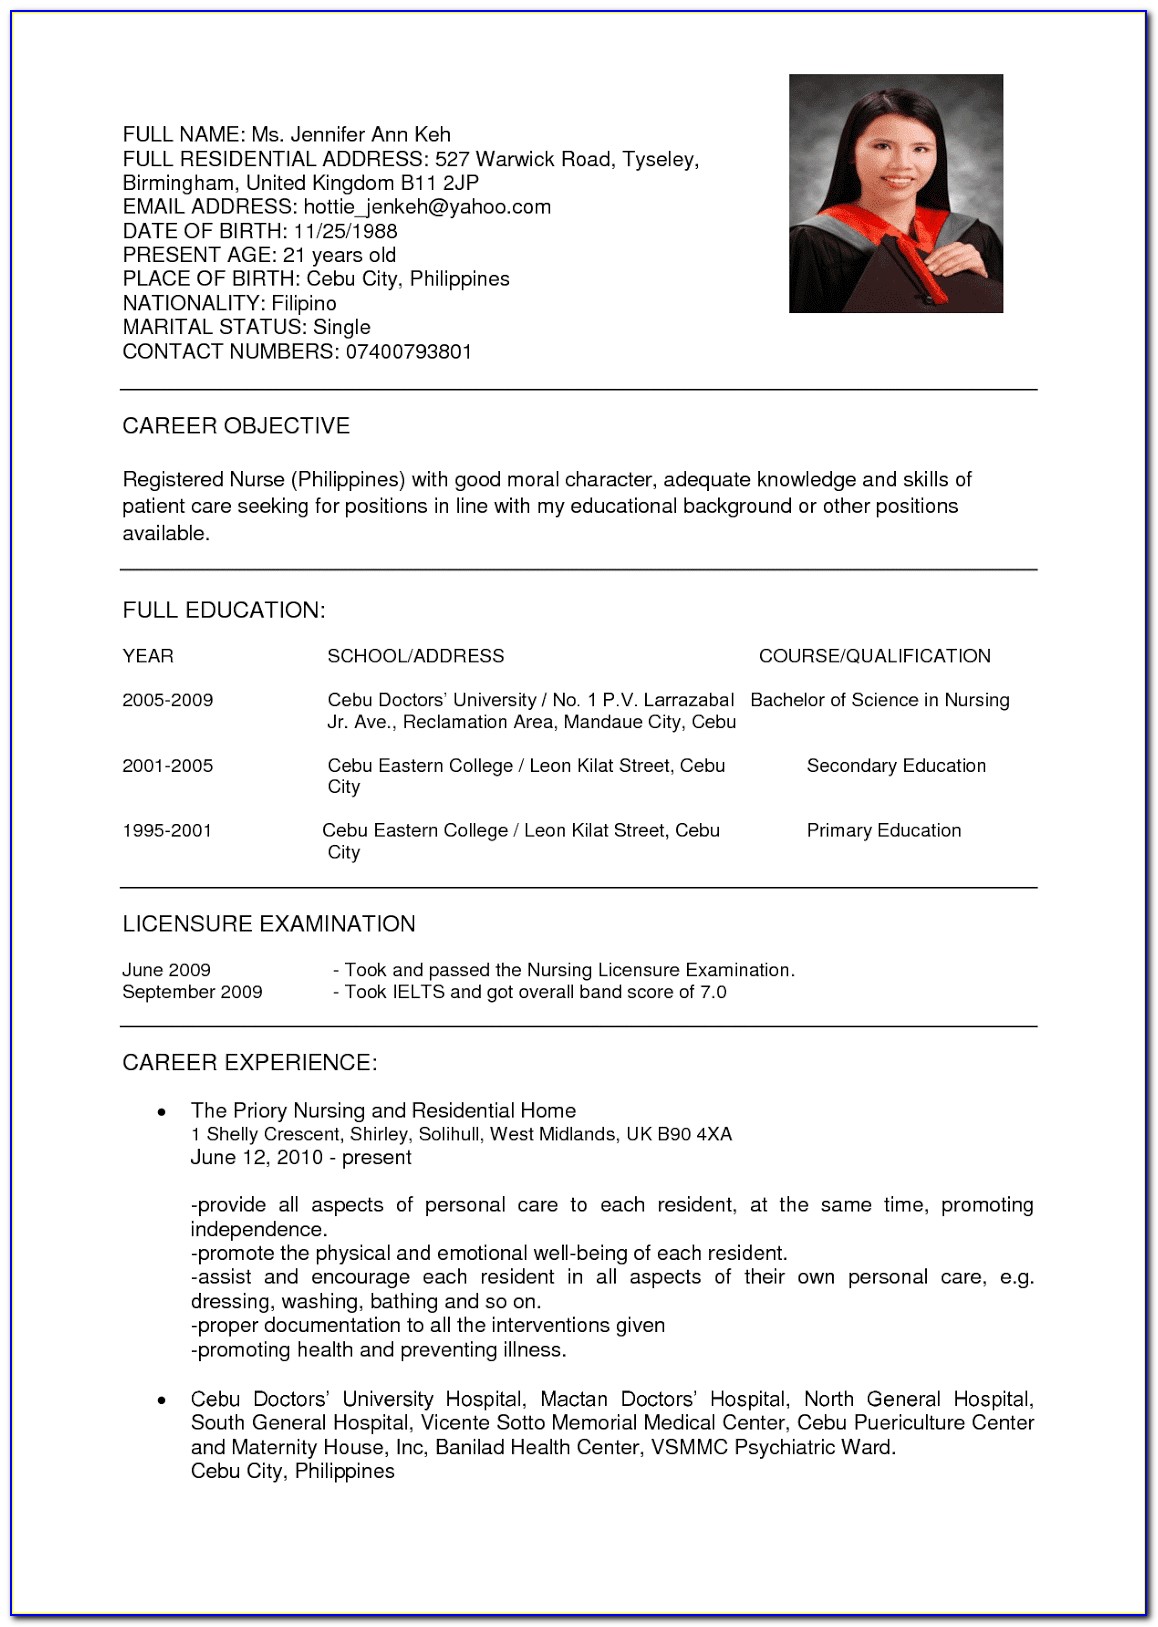 Sample Resume For Rn With One Year Experience